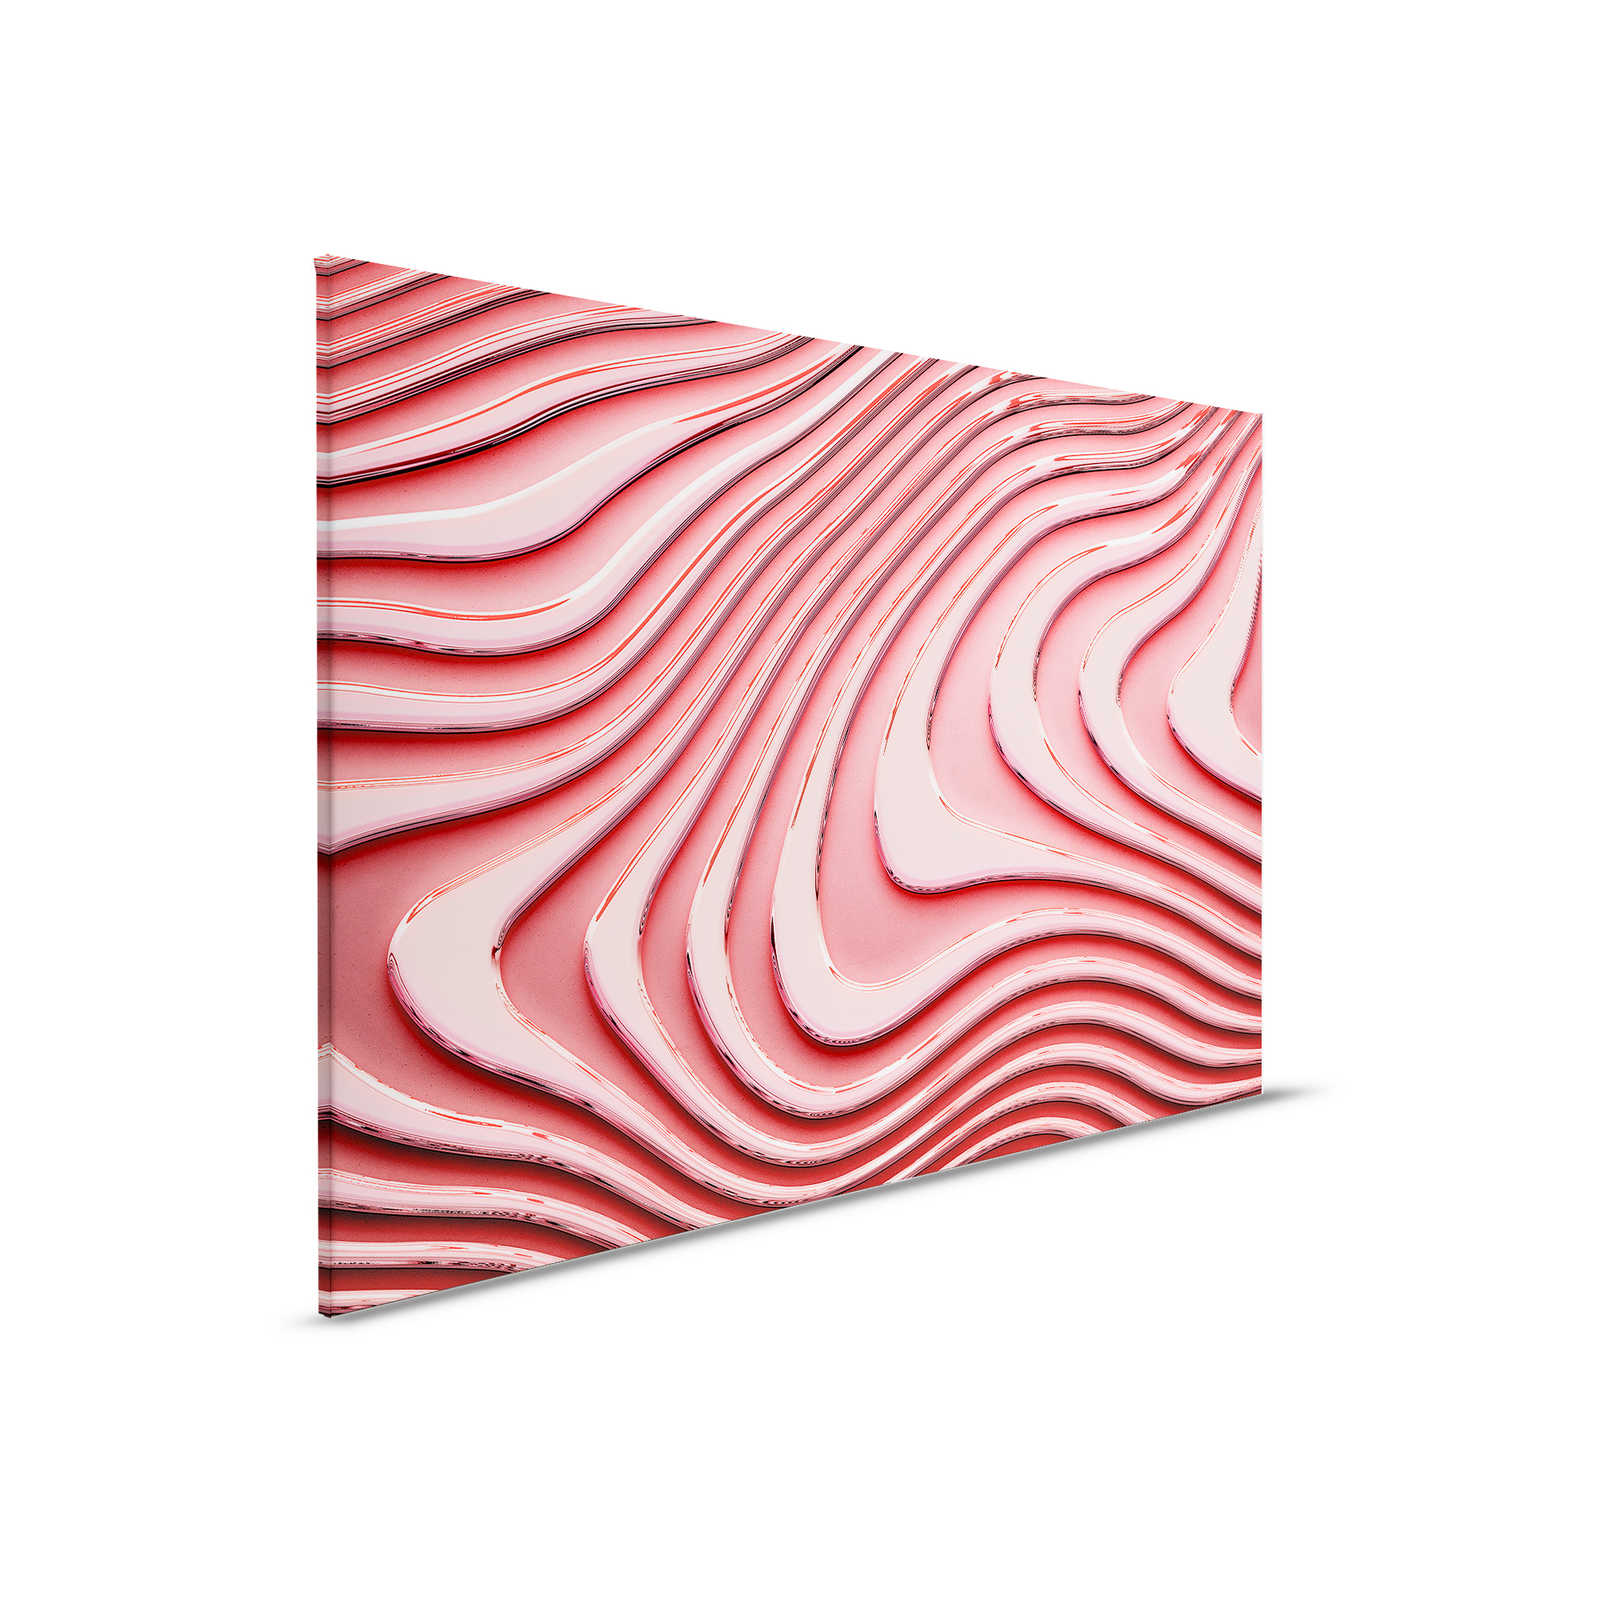         Canvas painting with wavy lines and shadows | pink, pink - 0.90 m x 0.60 m
    